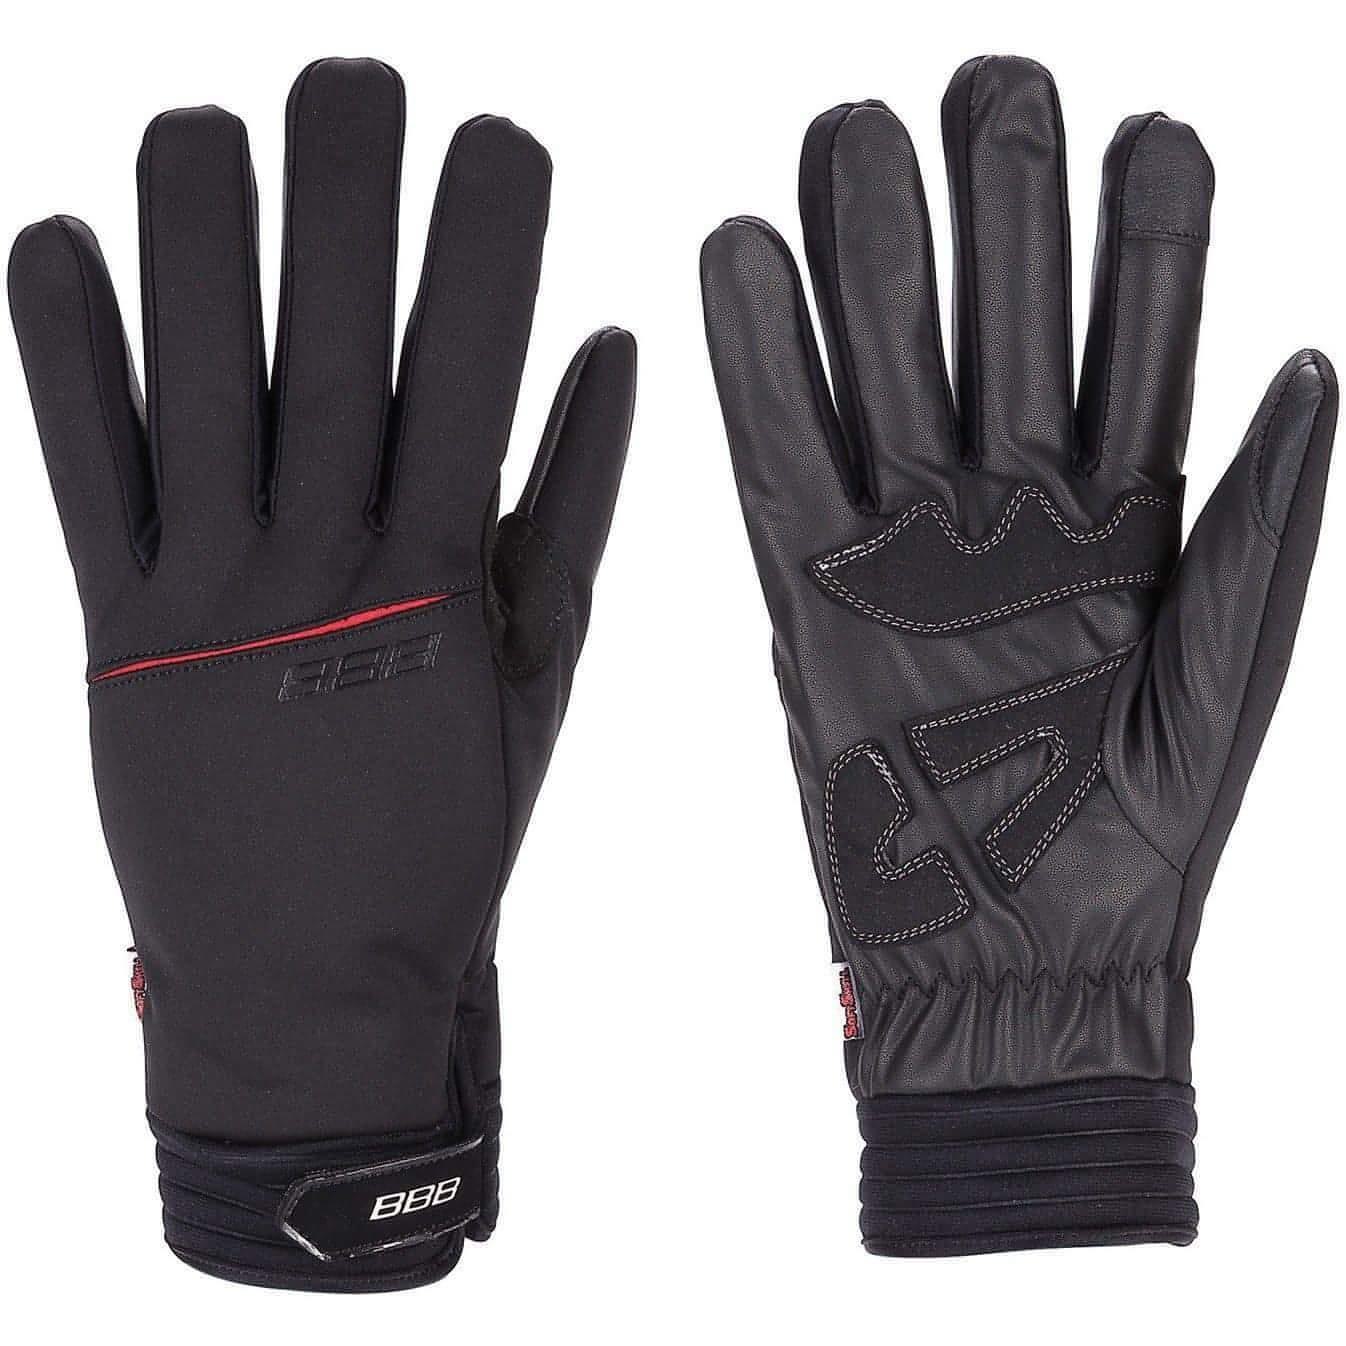 BBB ColdShield Winter Cycling Gloves